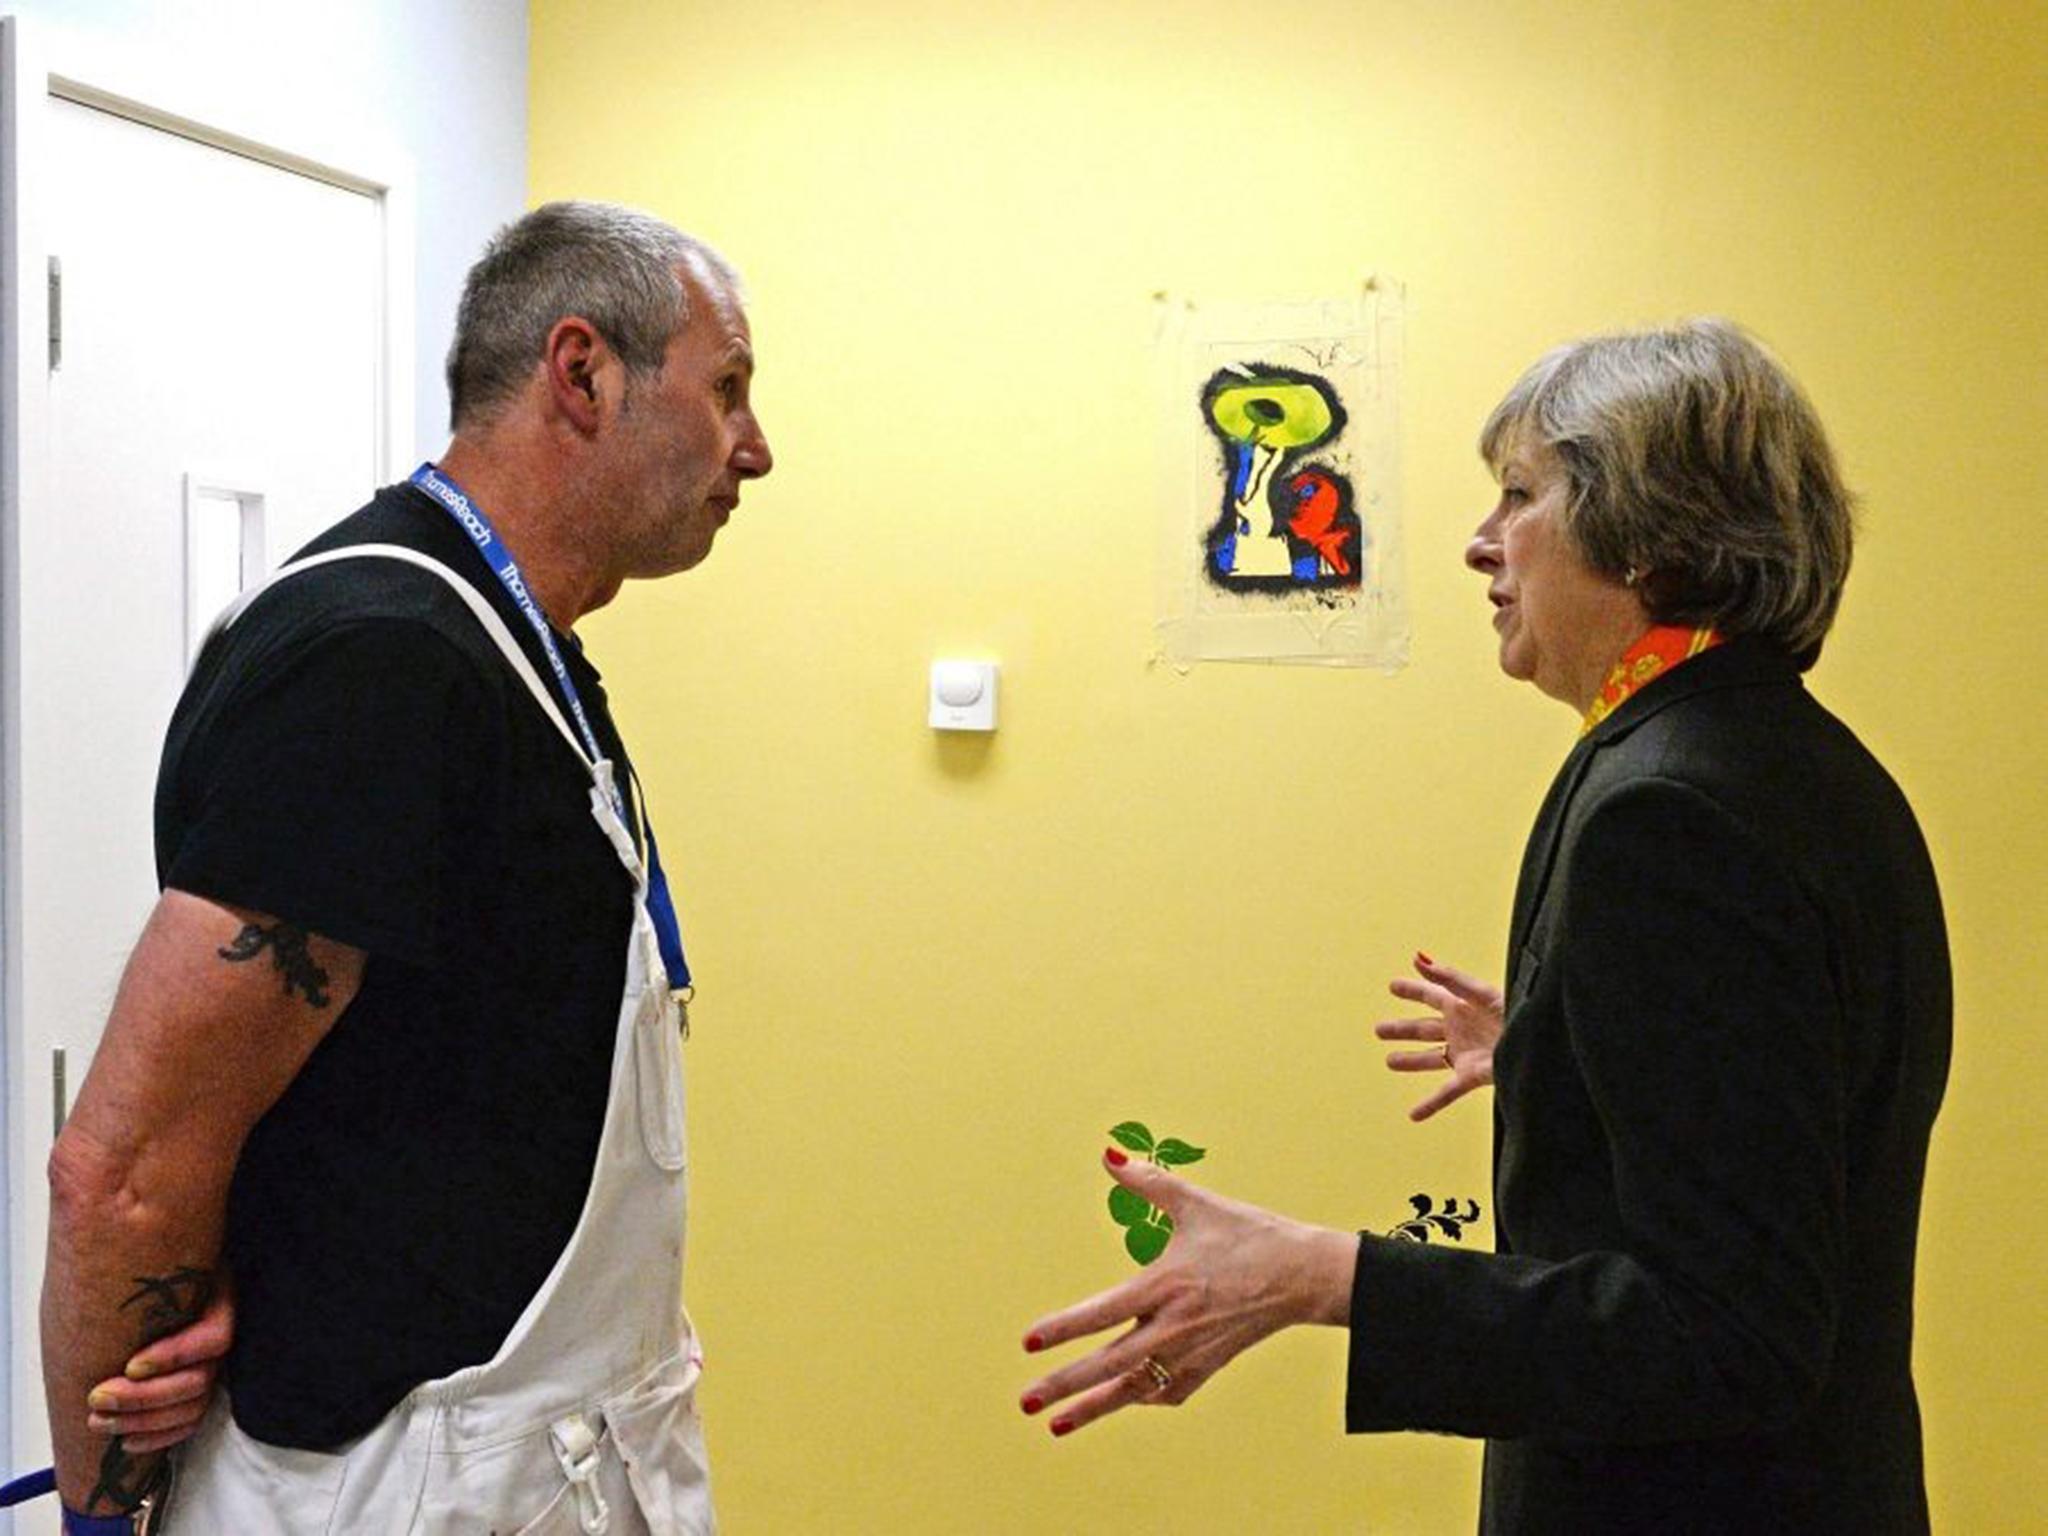 The PM met with former homeless people at a skills academy in the capital today